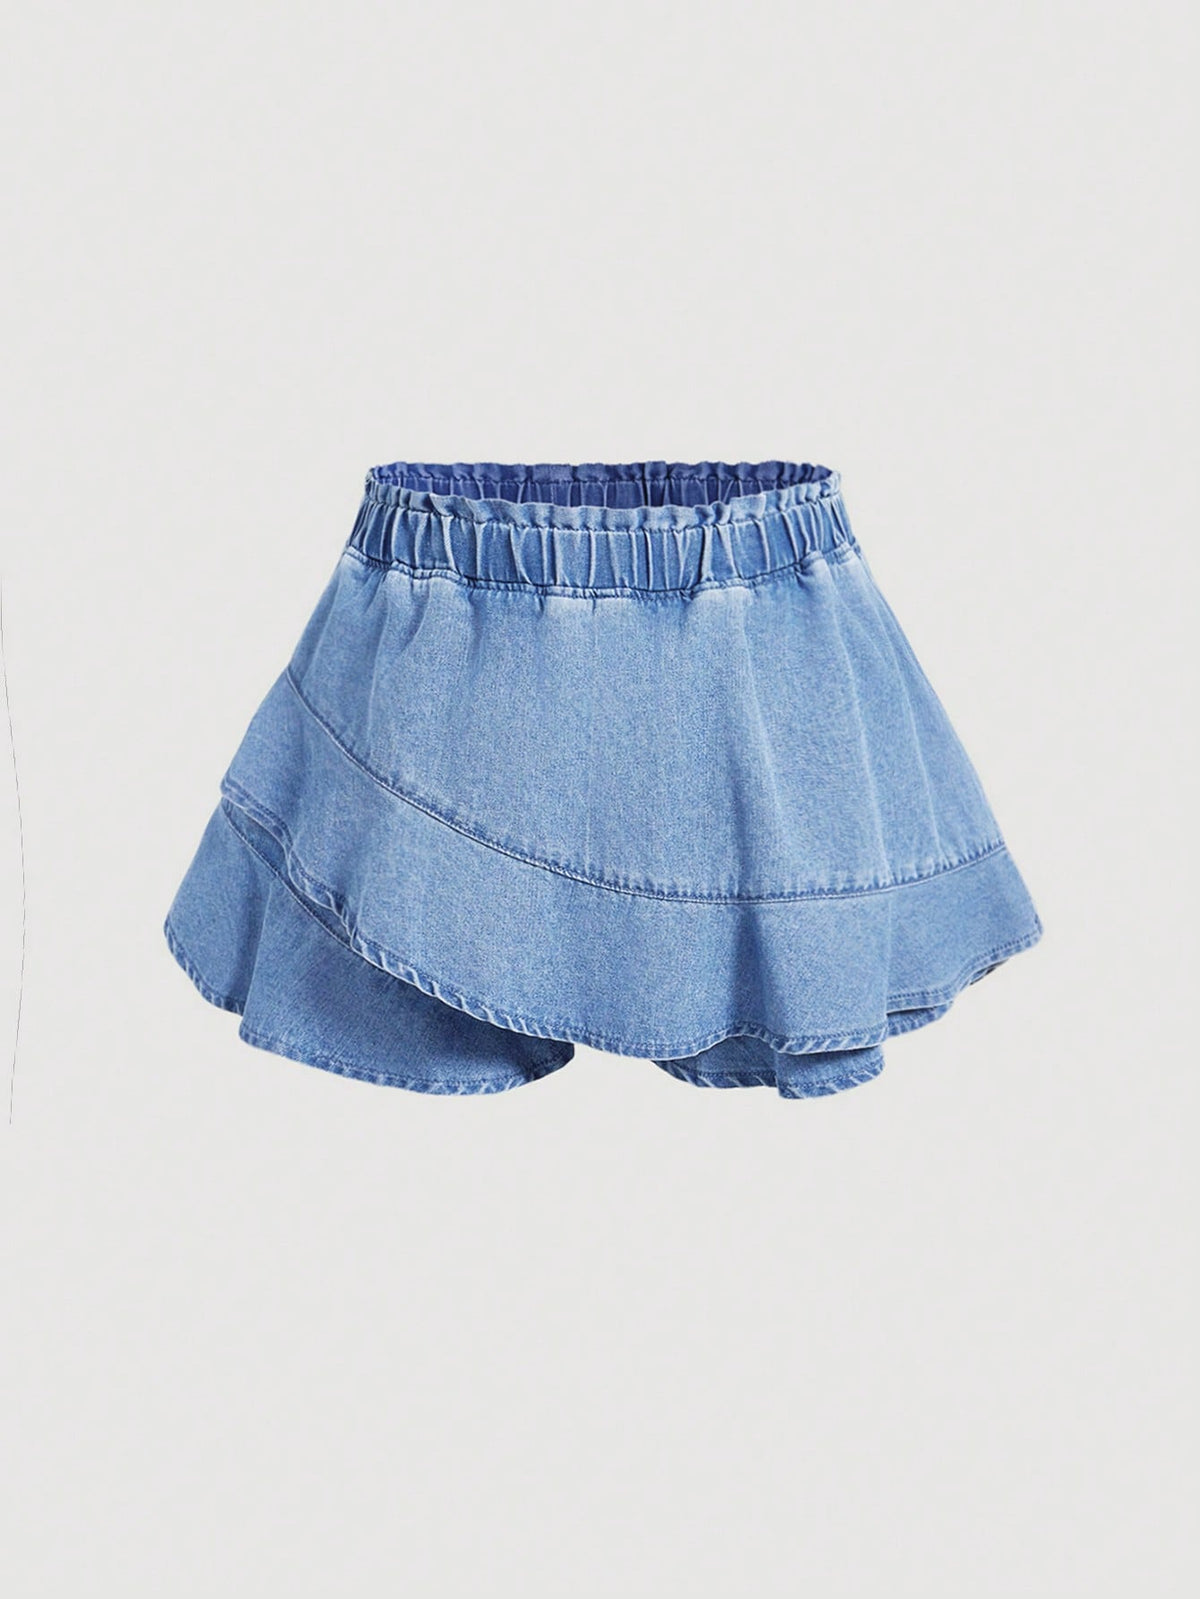 MOD SHEIN MOD Plus Sizeruffle Shorts Casual Sweet Loose Denim Shorts With Ruffle Hem, Summer Outfits,Back To School,Earthy Clothes,Blue